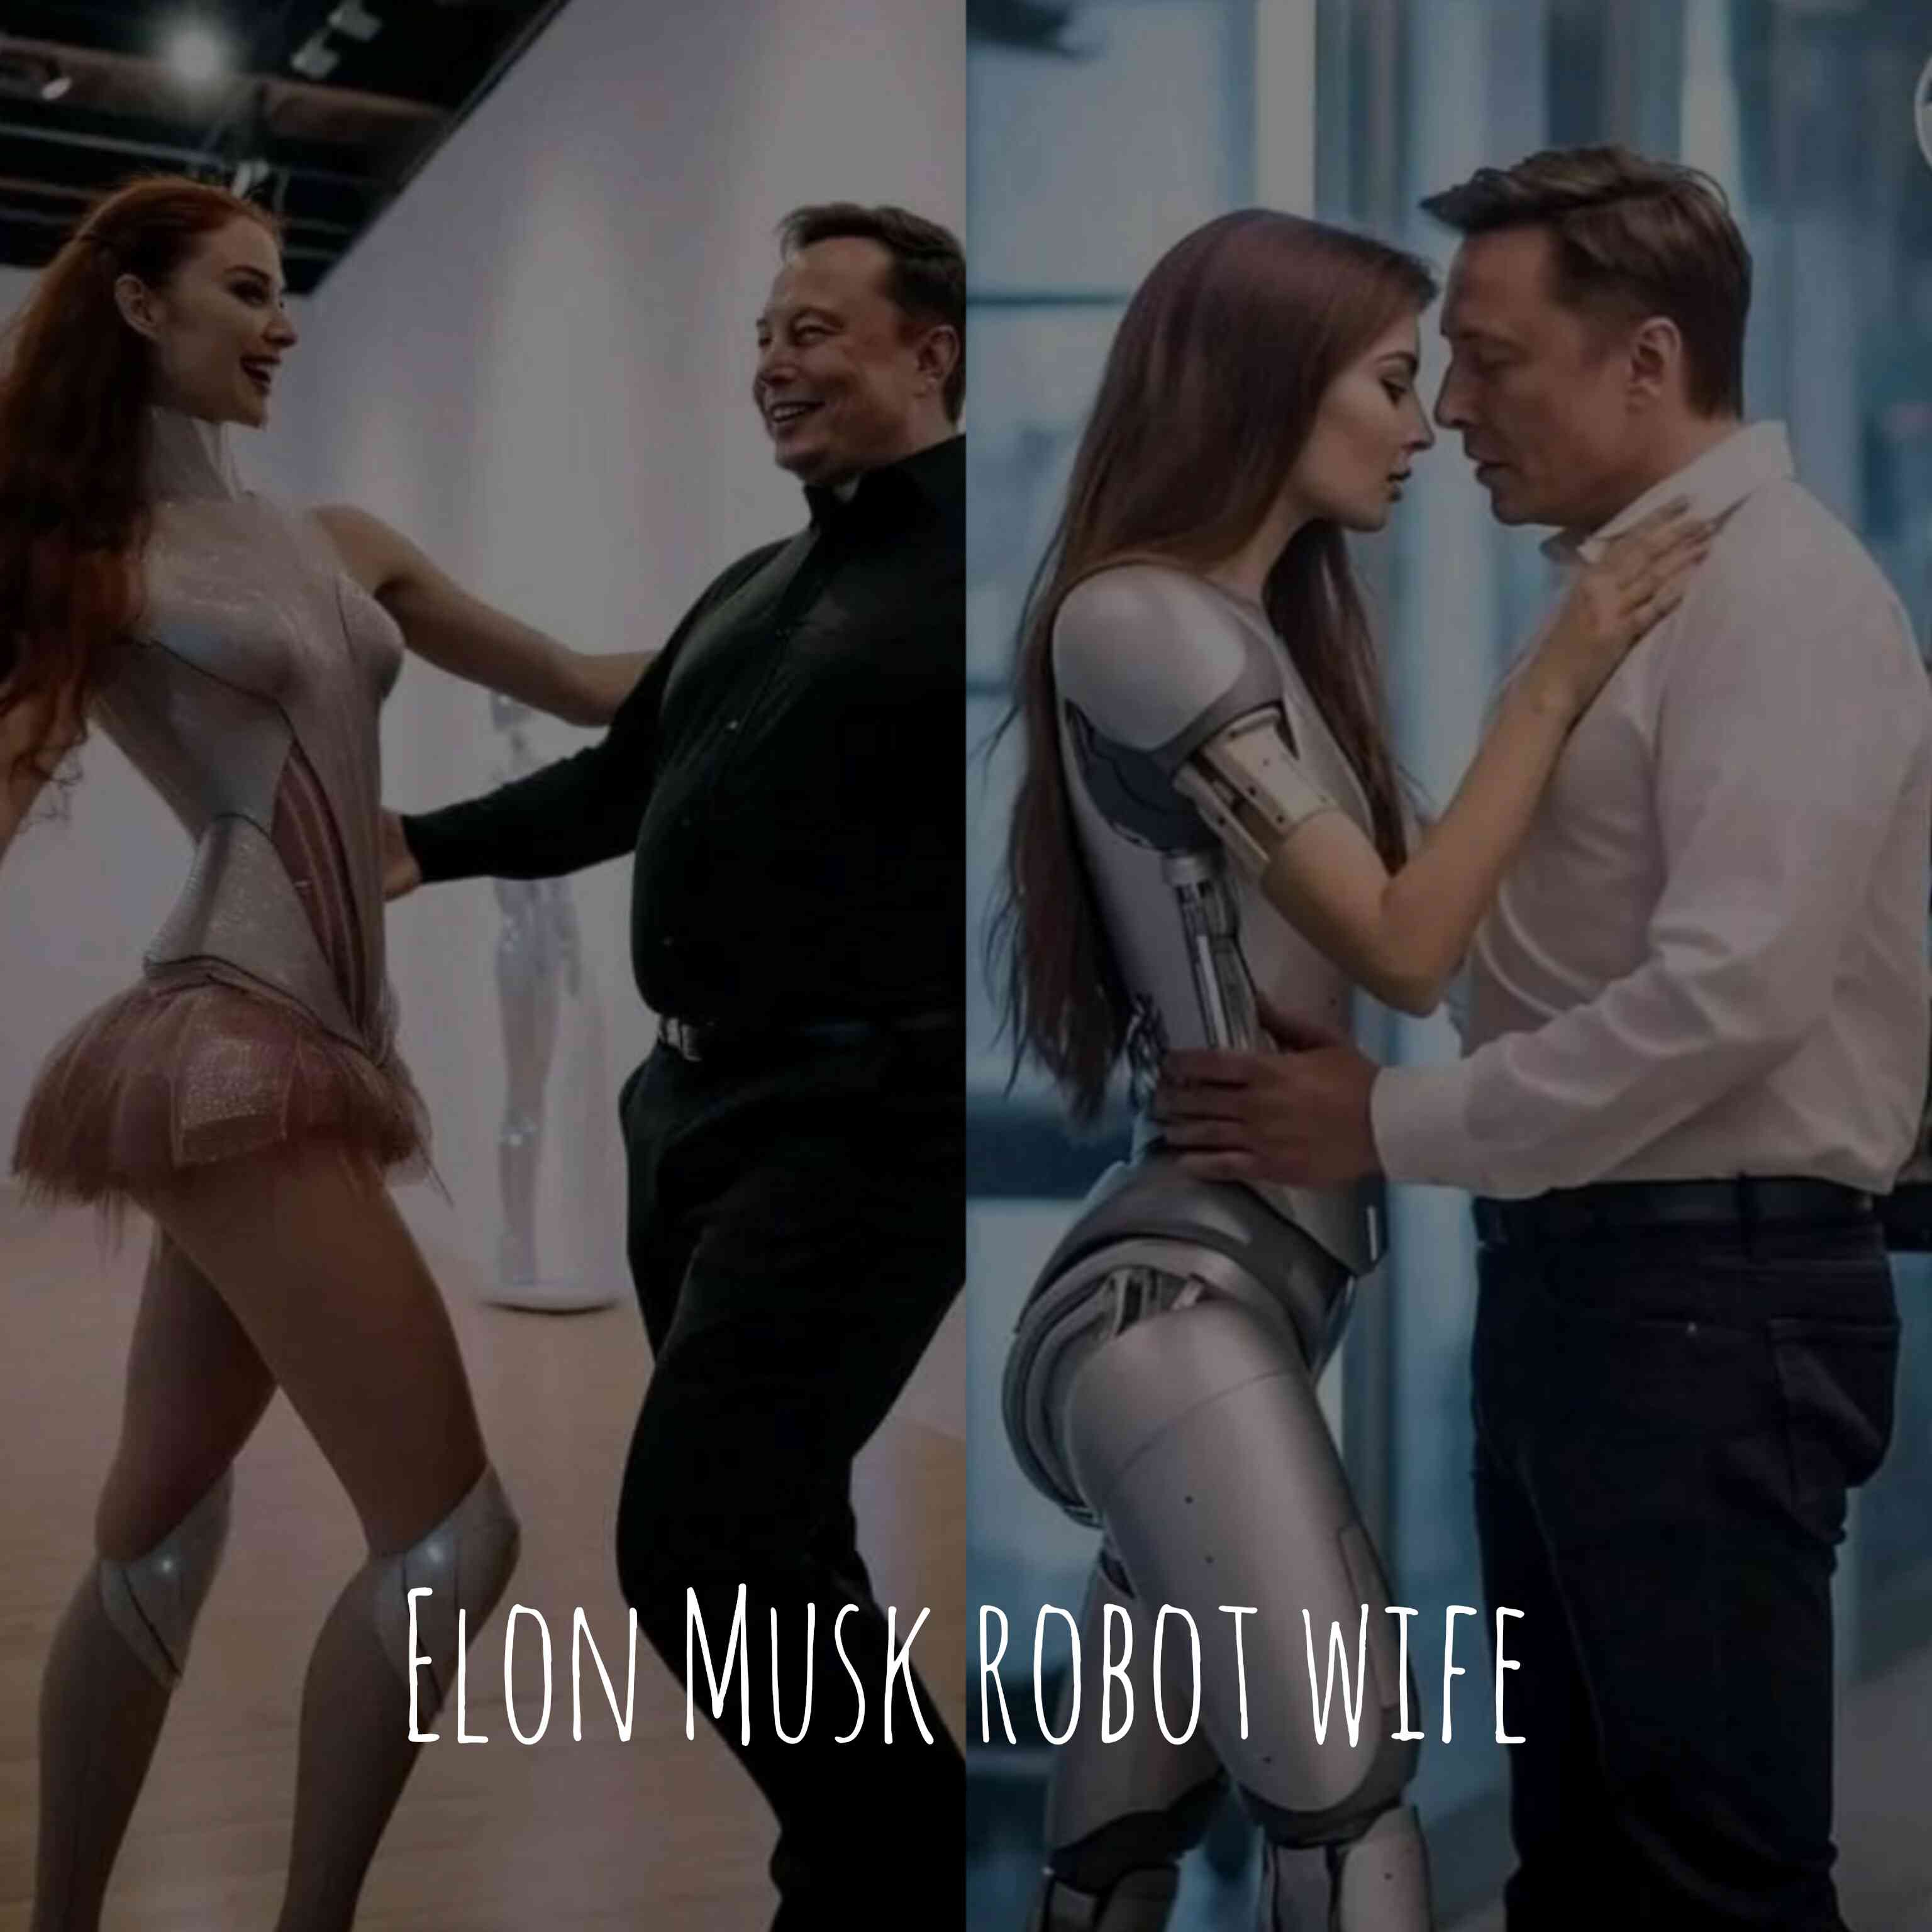 Elon Musk robot wives set to launch by September 2023 - MirrorLog